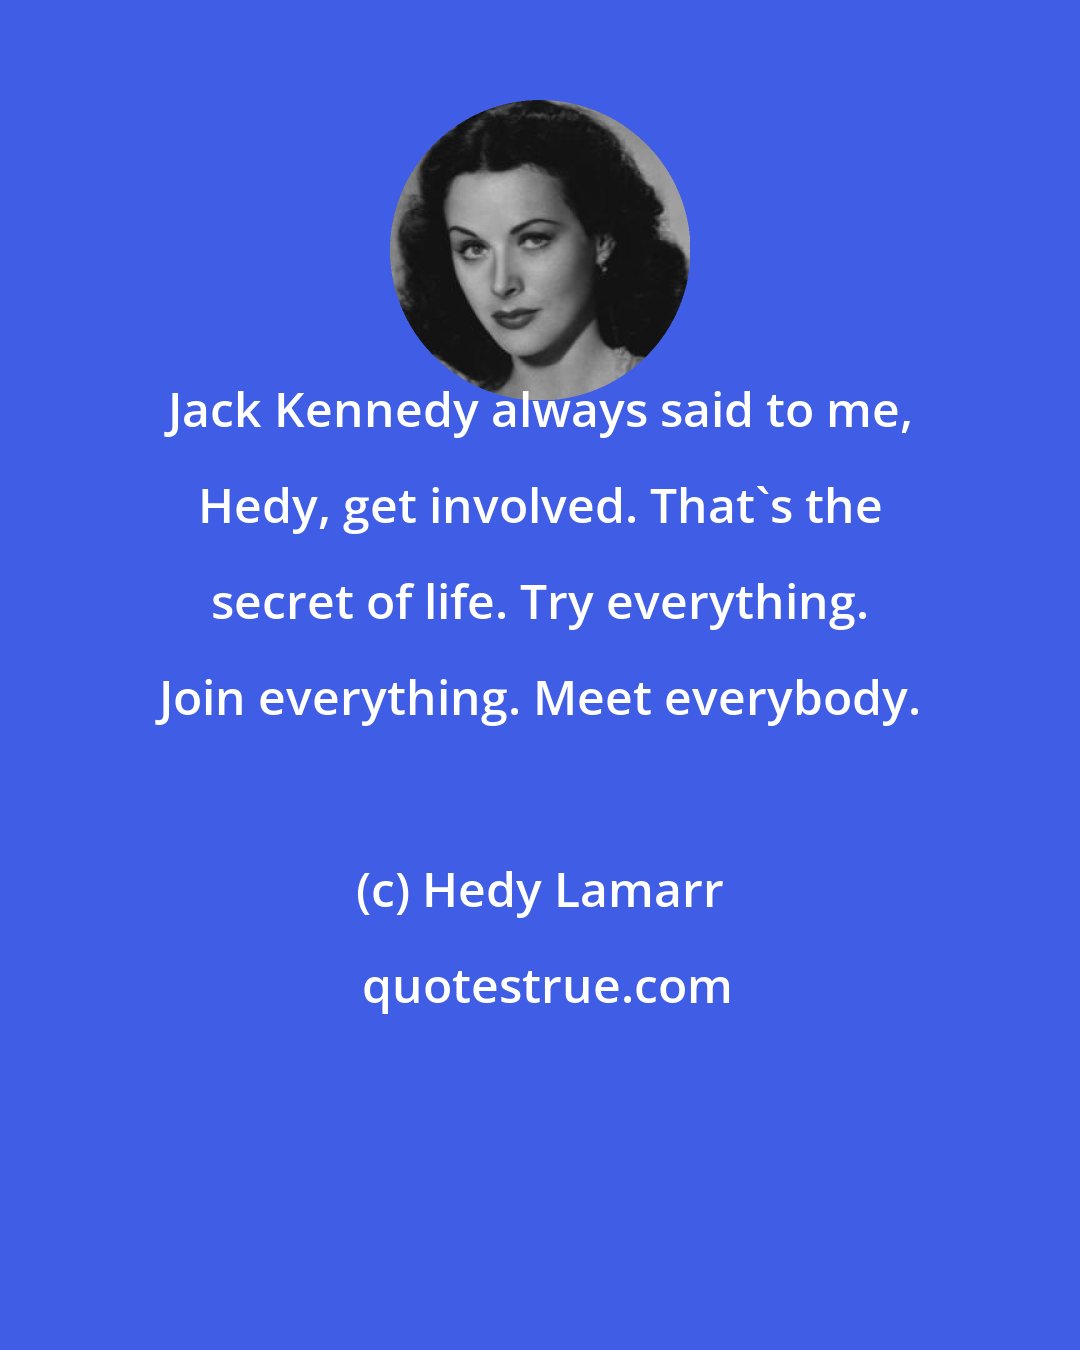 Hedy Lamarr: Jack Kennedy always said to me, Hedy, get involved. That's the secret of life. Try everything. Join everything. Meet everybody.